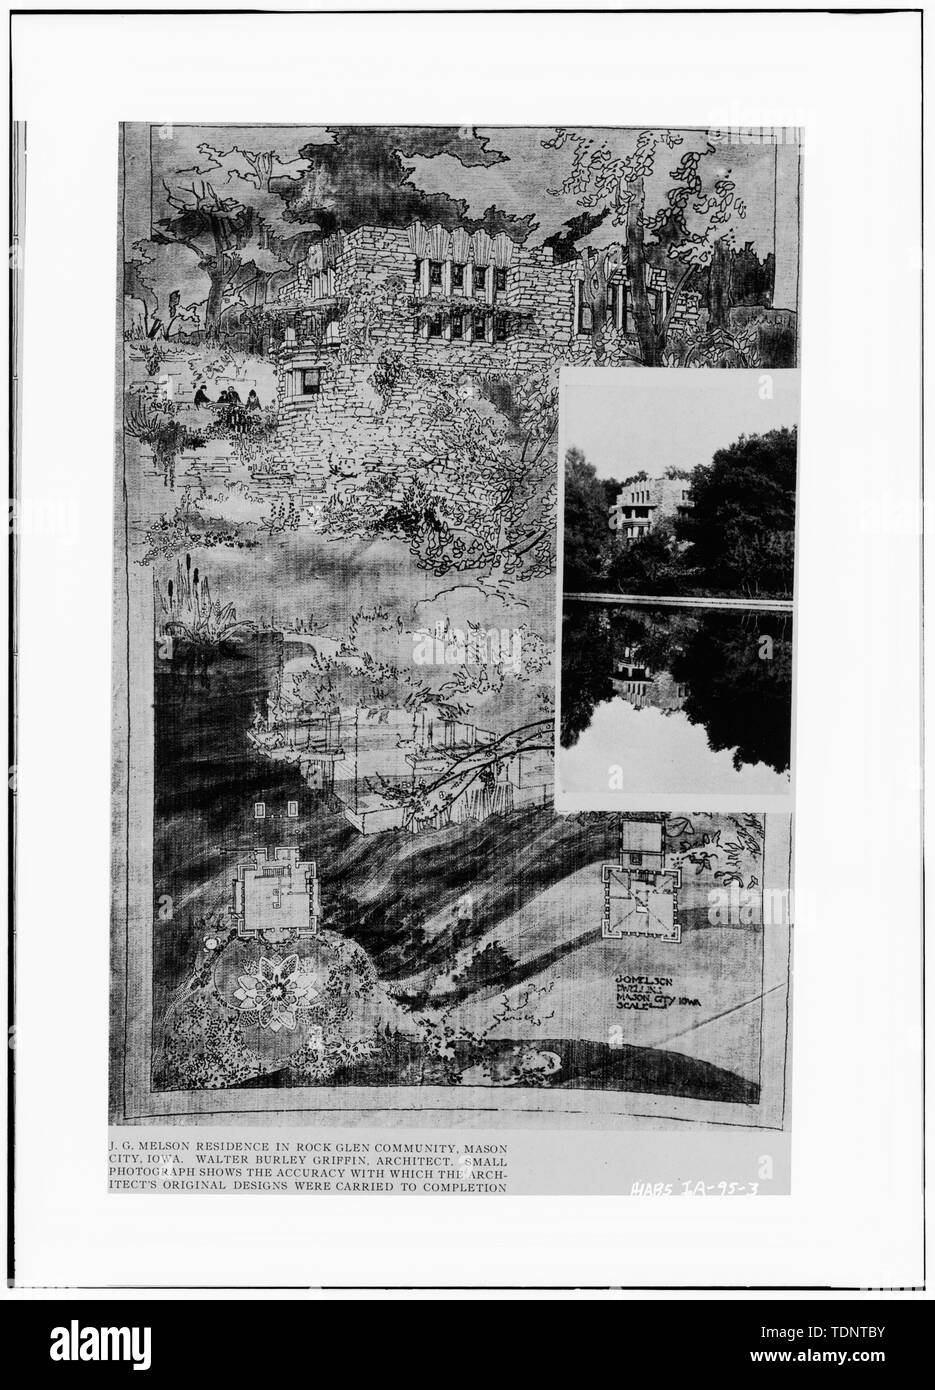 Photocopy form Western Architect, Vol, 19, No. 8, August 1913, following page 80. 'TOWN AND COMMUNITY PLANNING, WALTER BURLEY GRIFFEN.' ORIGINAL PRESENTATION DRAWING AT NORTHWESTERN UNIVERSITY, ART DEPARTMENT. - Joshua G. Melson House, 56 River Heights Drive, Mason City, Cerro Gordo County, IA Stock Photo